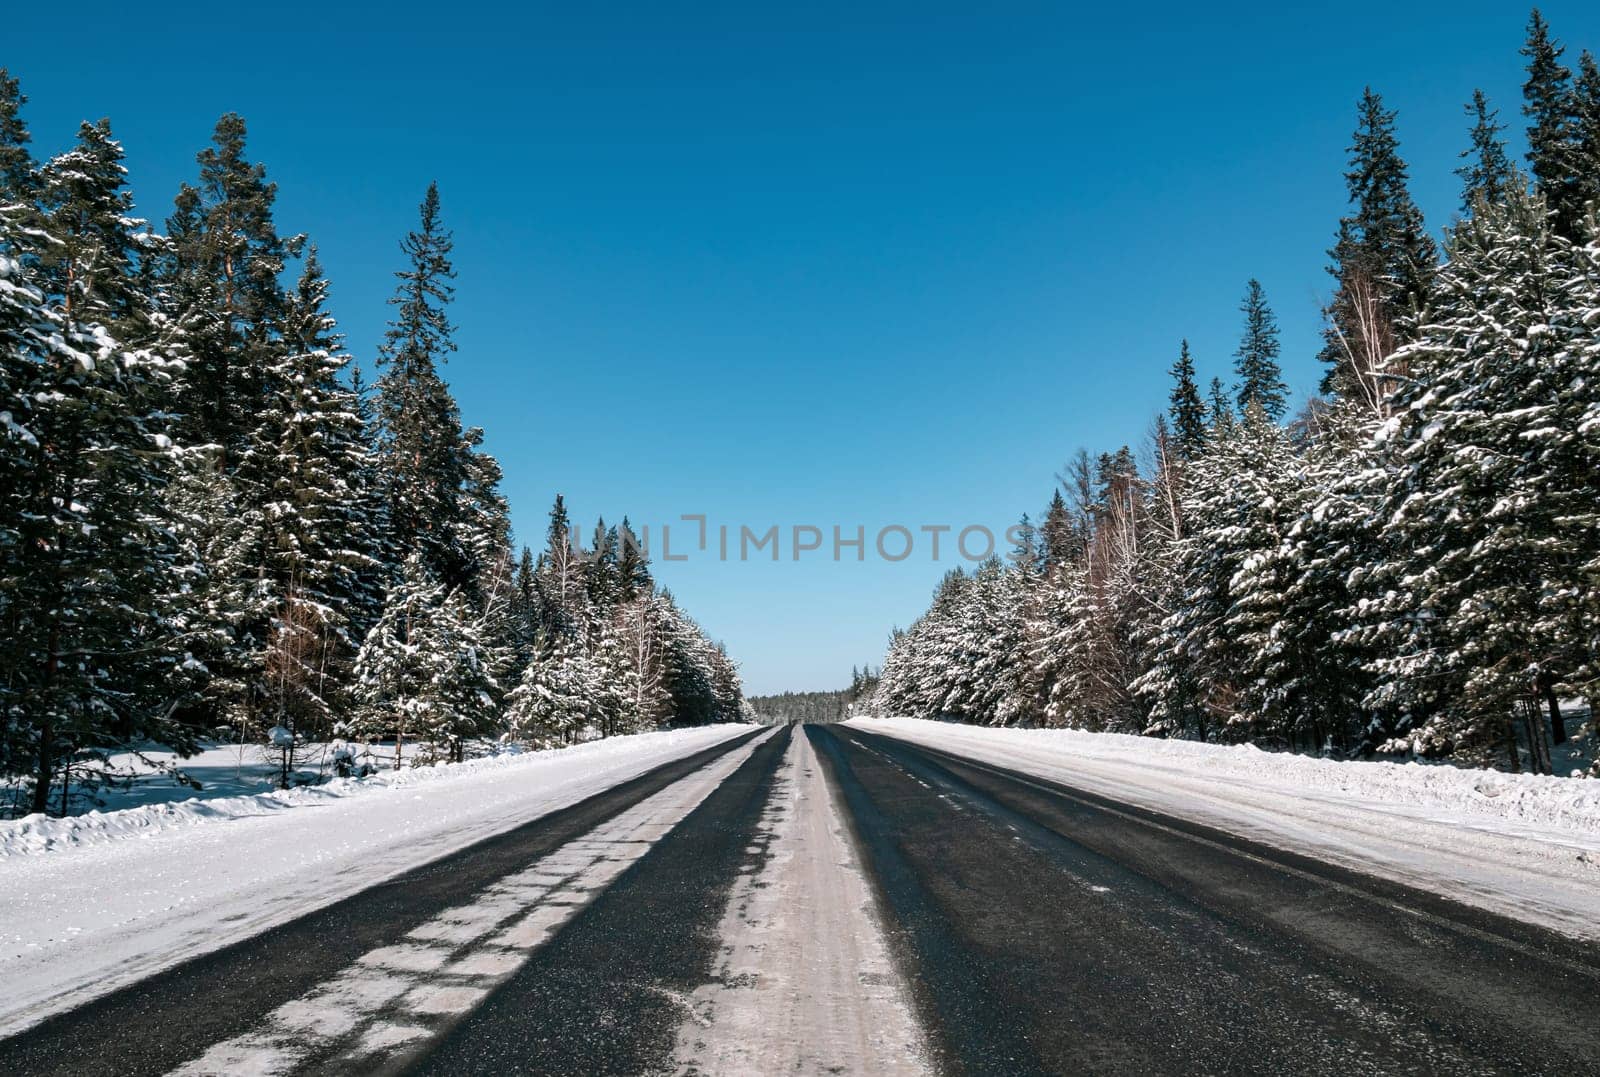 A long stretch of a deserted highway runs through a dense pine forest, blanketed in snow